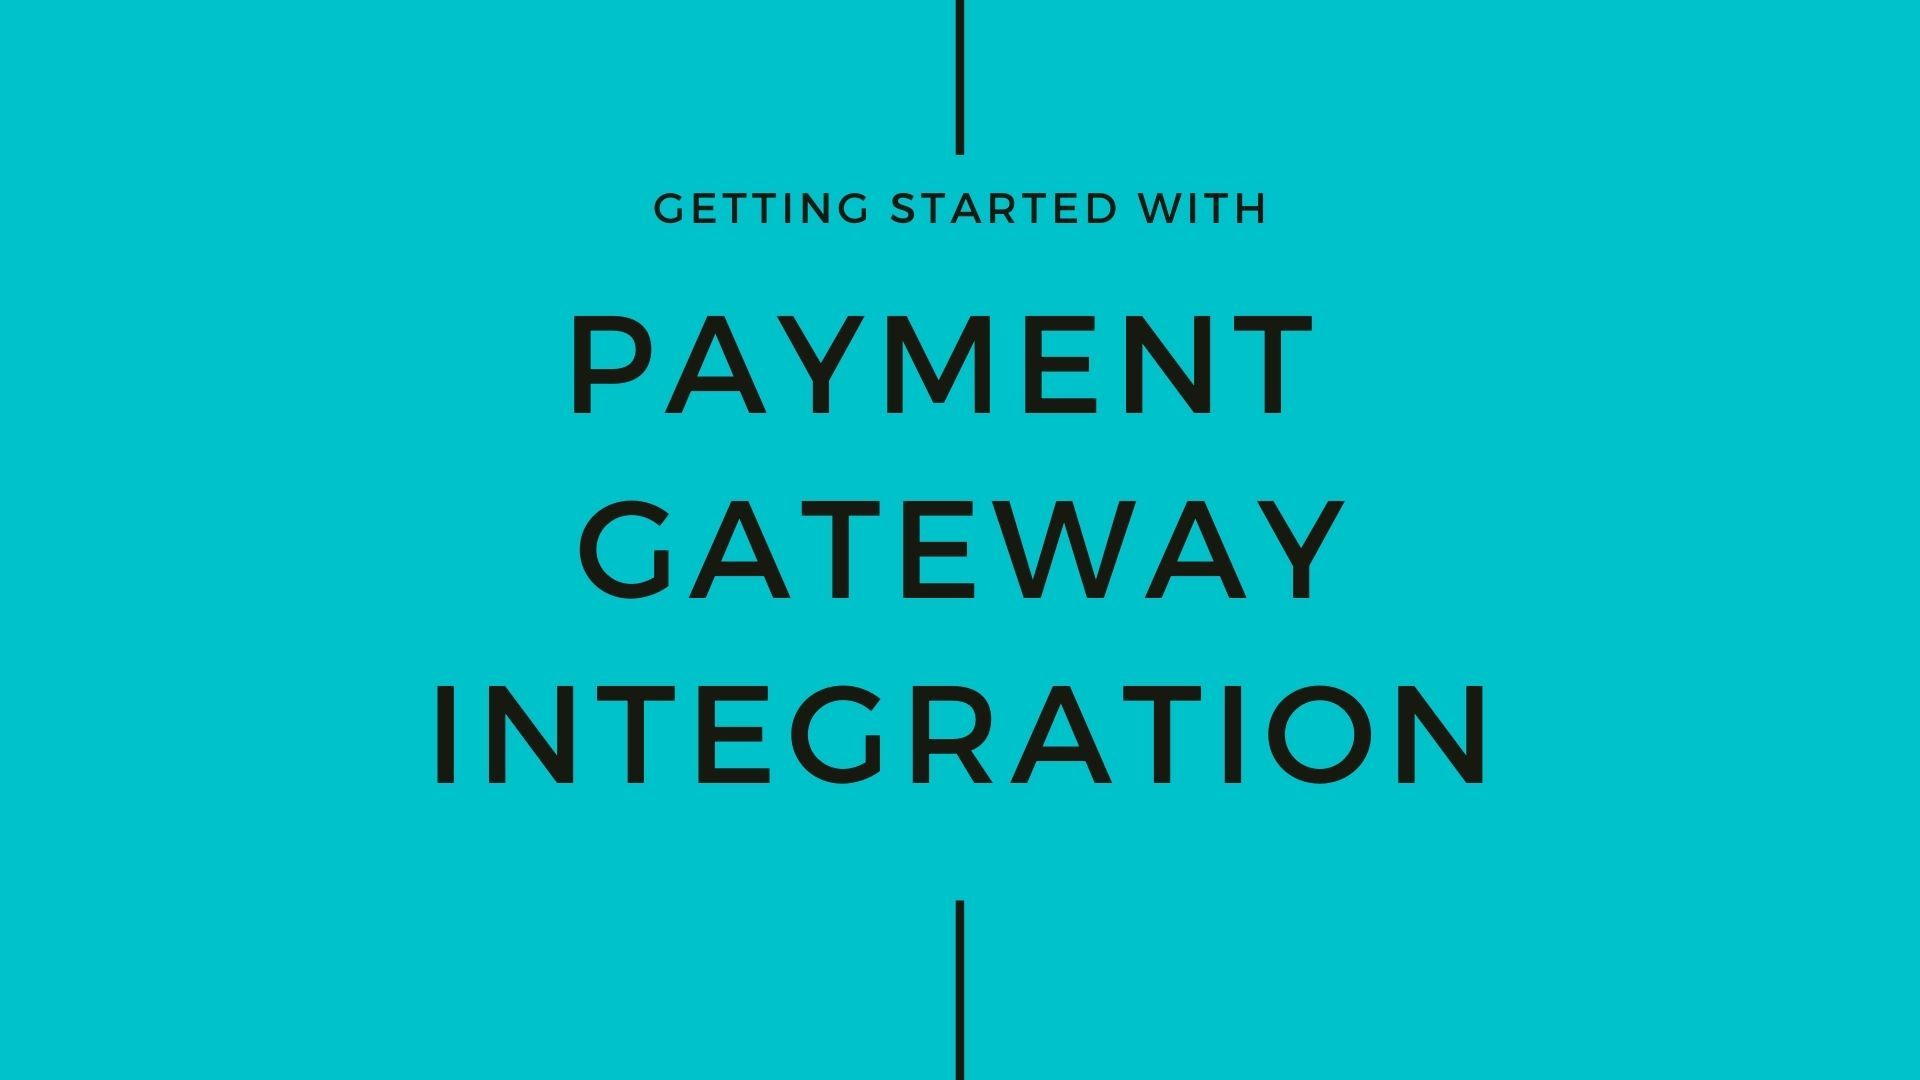 Use Of Payment Gateway Integration: Payment Gateway Integration Is An Essential Feature That Enables Customers To Make Payments For Their Purchases Securely.